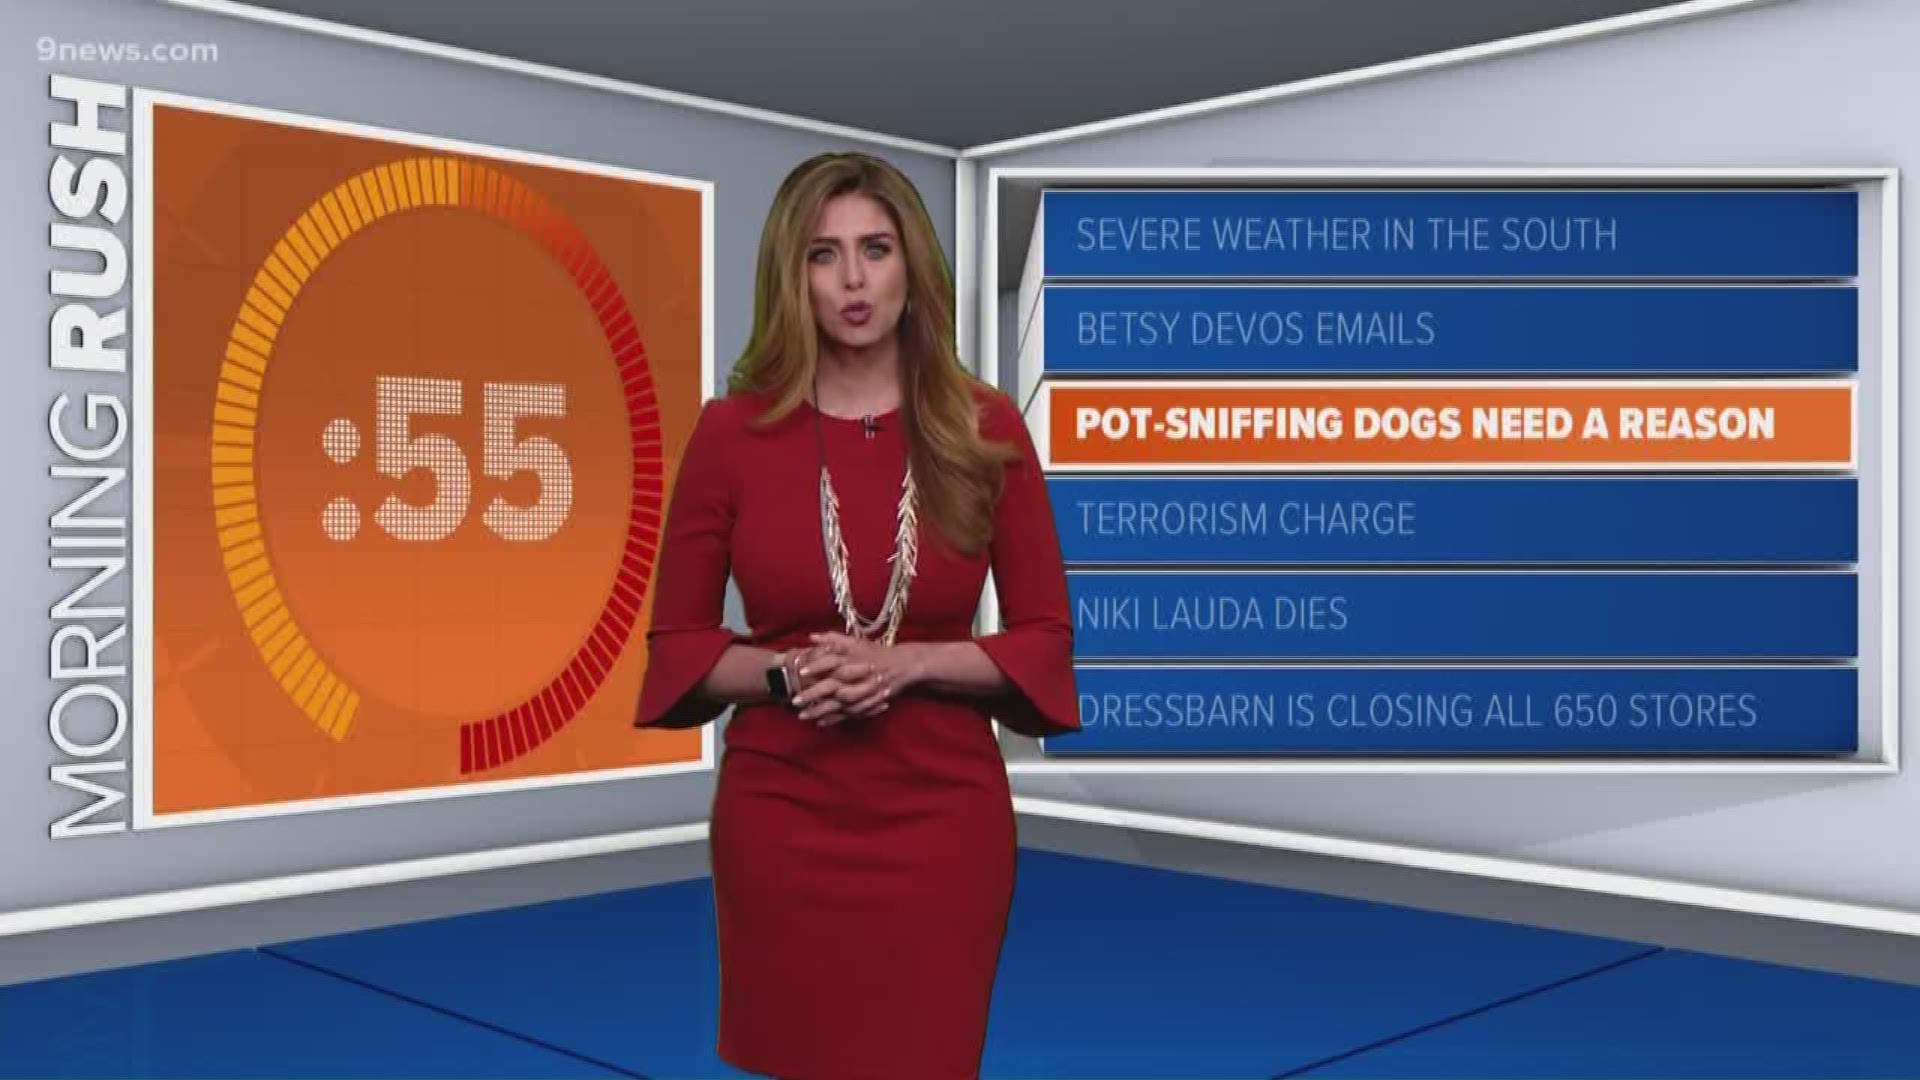 The top morning headlines and weather for Tuesday, May 21st, 2019.